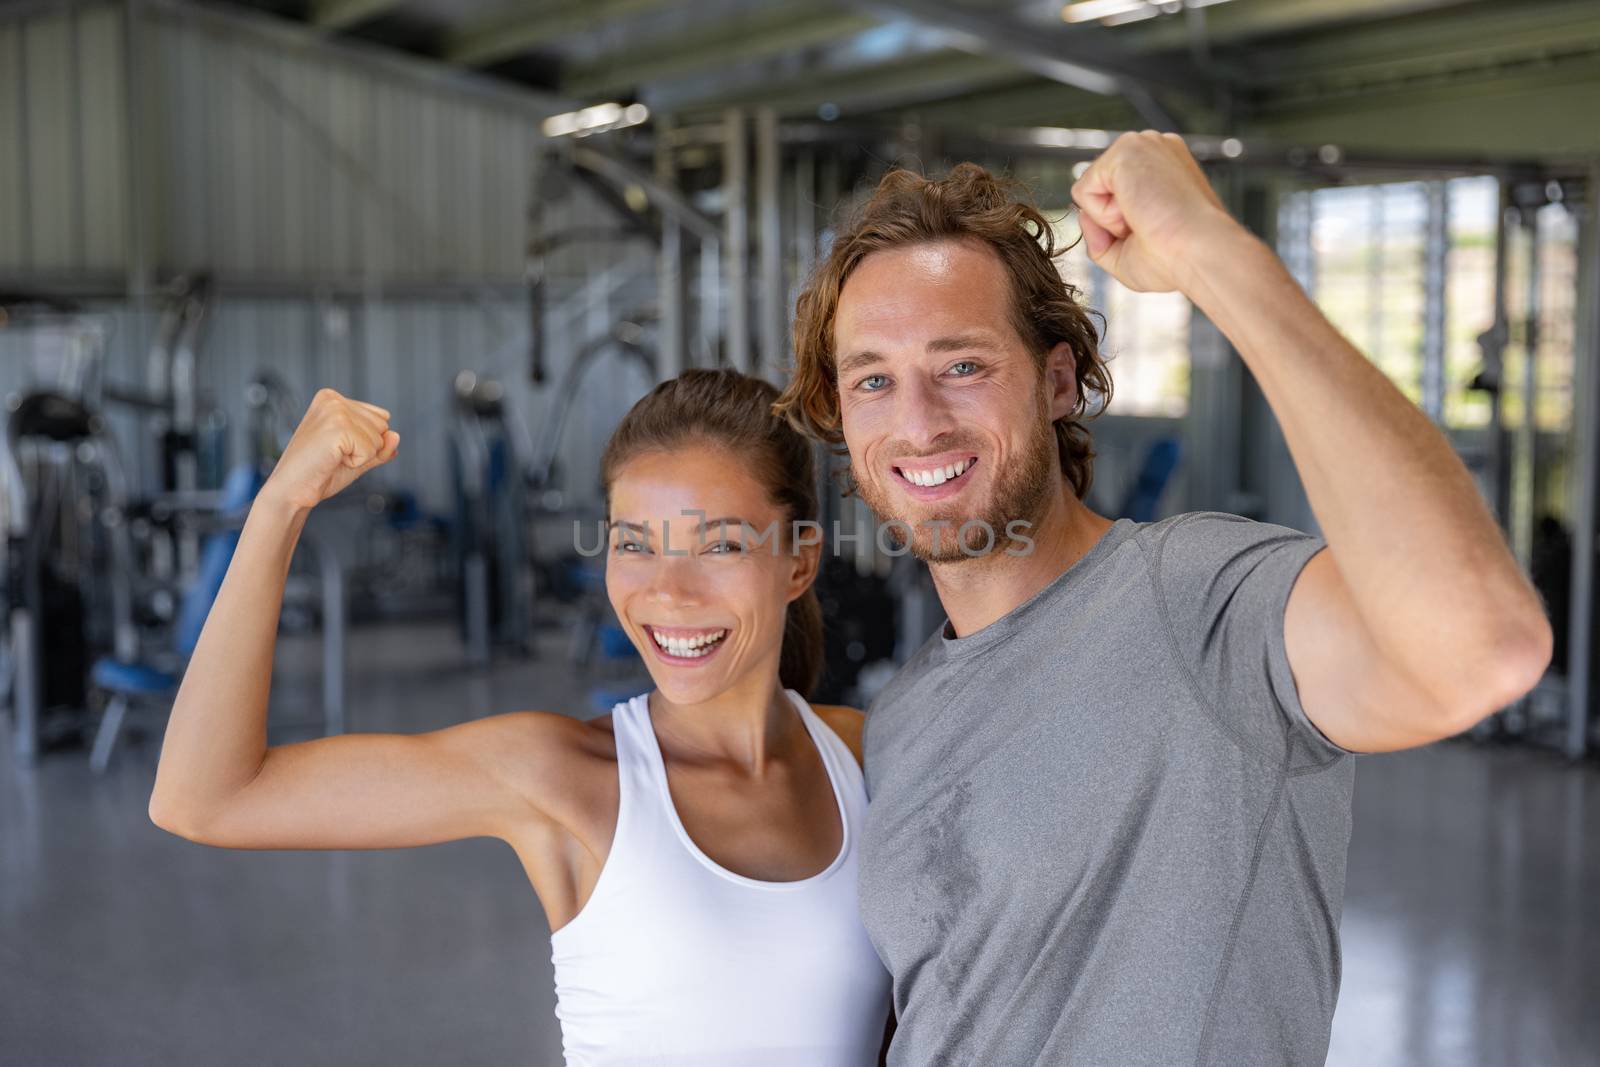 Fit power couple happy flexing strong arms showing off success training at fitness gym - Smiling Asian woman, Caucasian man .